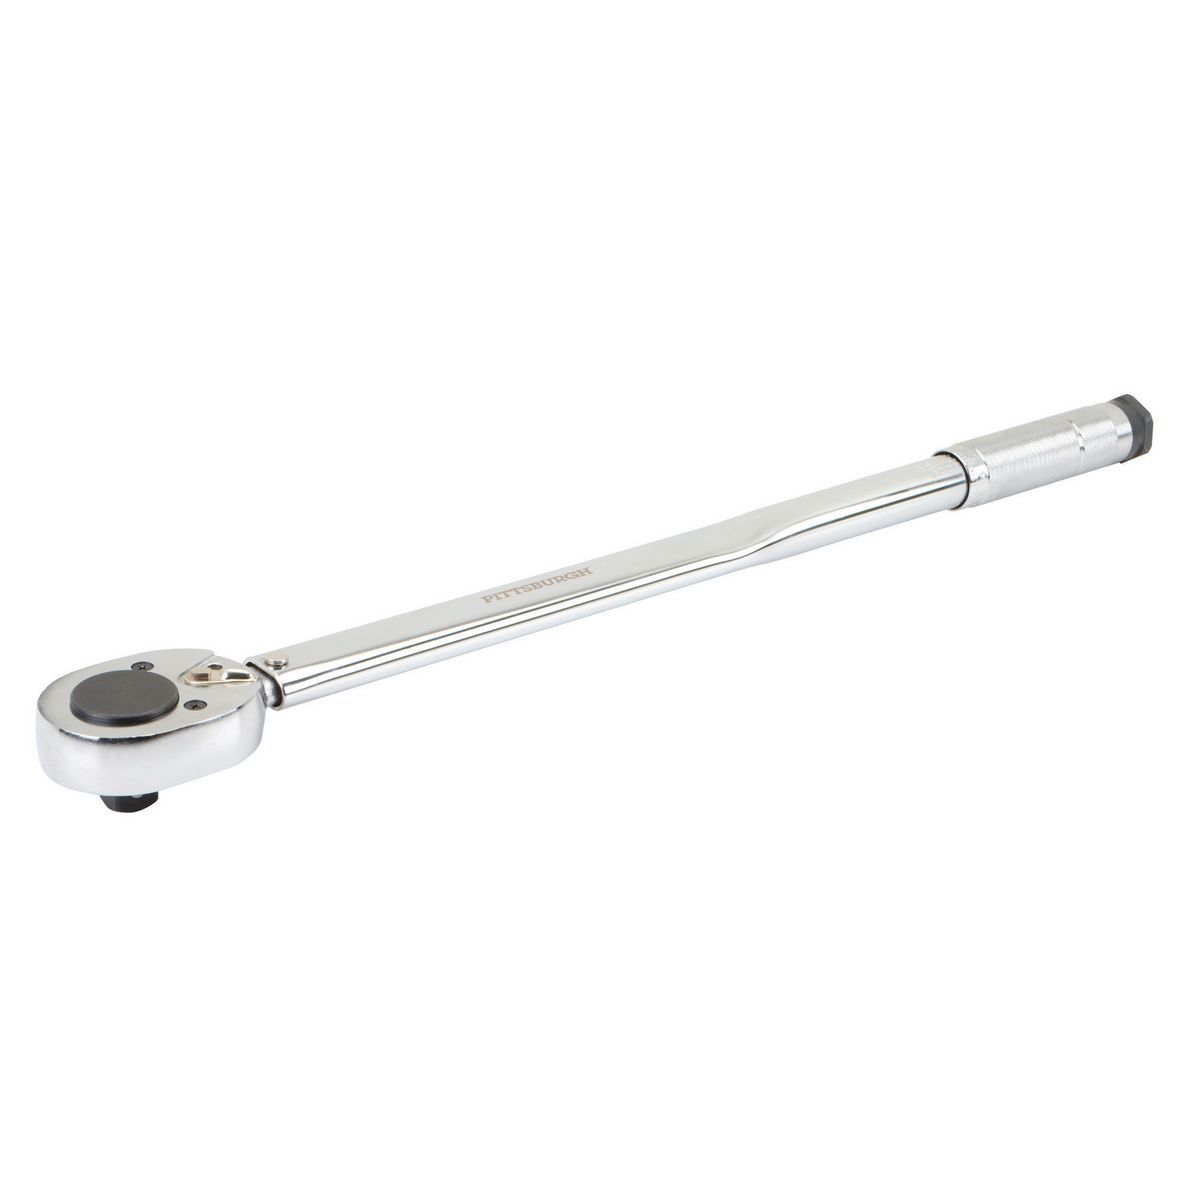 PITTSBURGH 3/4 in. Drive 50-300 ft. lb. Click Torque Wrench